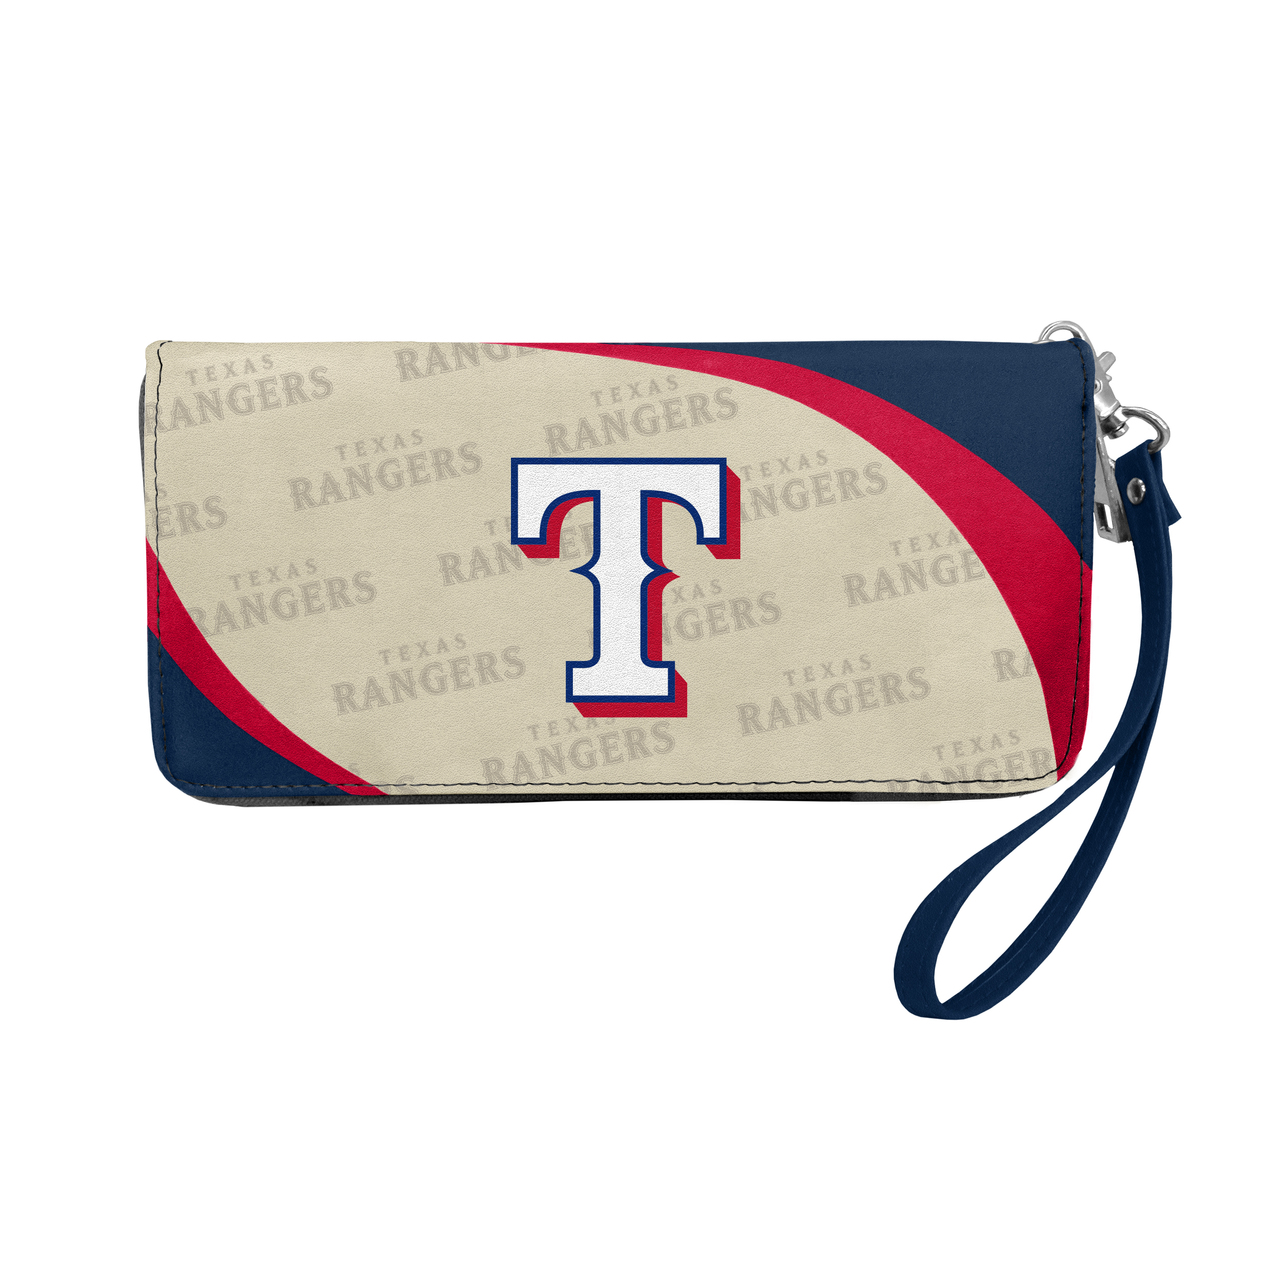 Texas Rangers Wallet Curve Organizer Style - Special Order